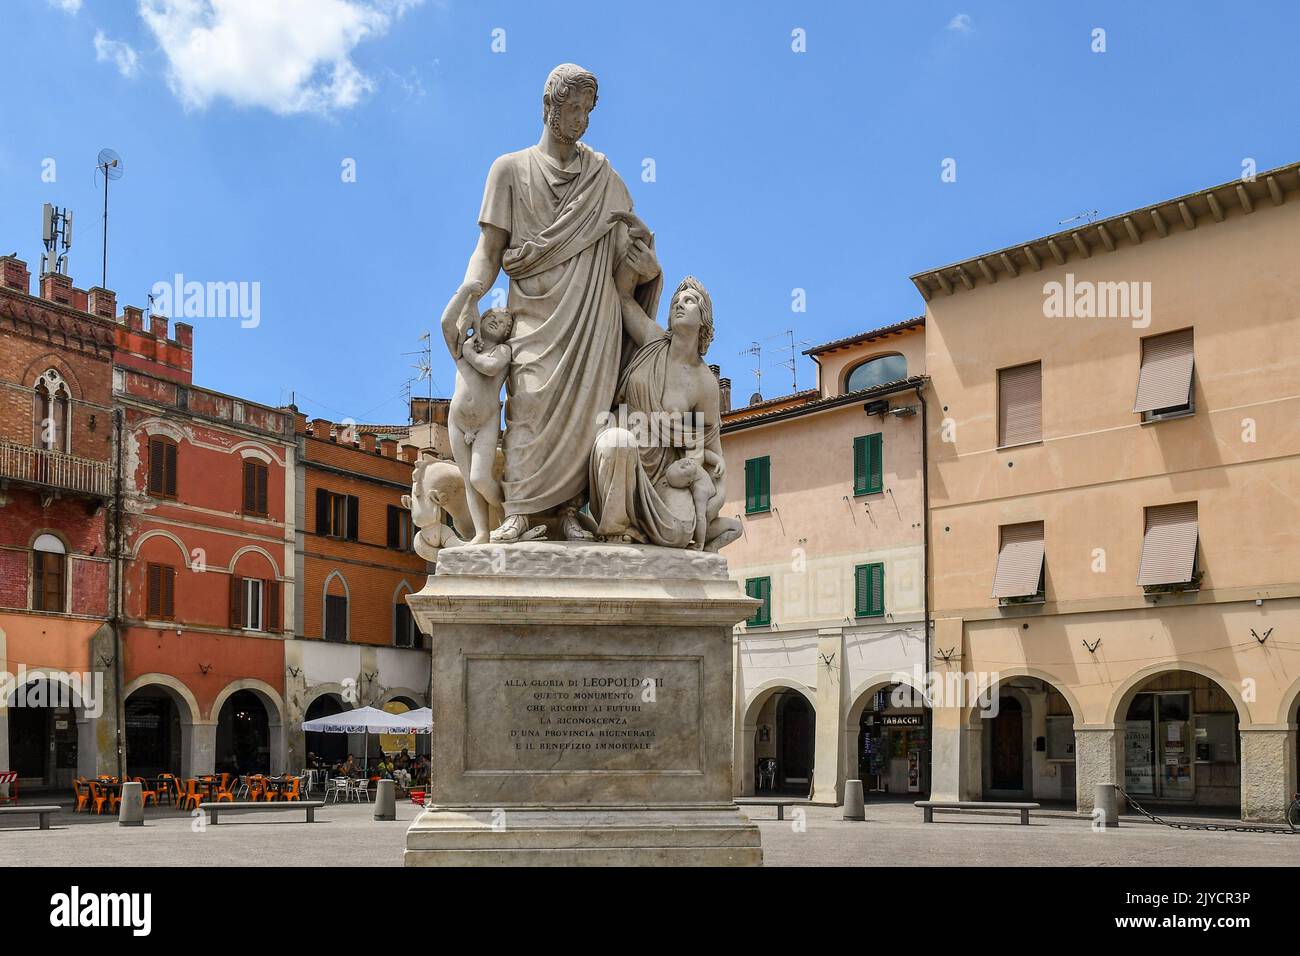 The monument to Leopold II, Grand Duke of Tuscany ('Canapone'), in Piazza Dante, the main square of Grosseto, Tuscany, Italy Stock Photo